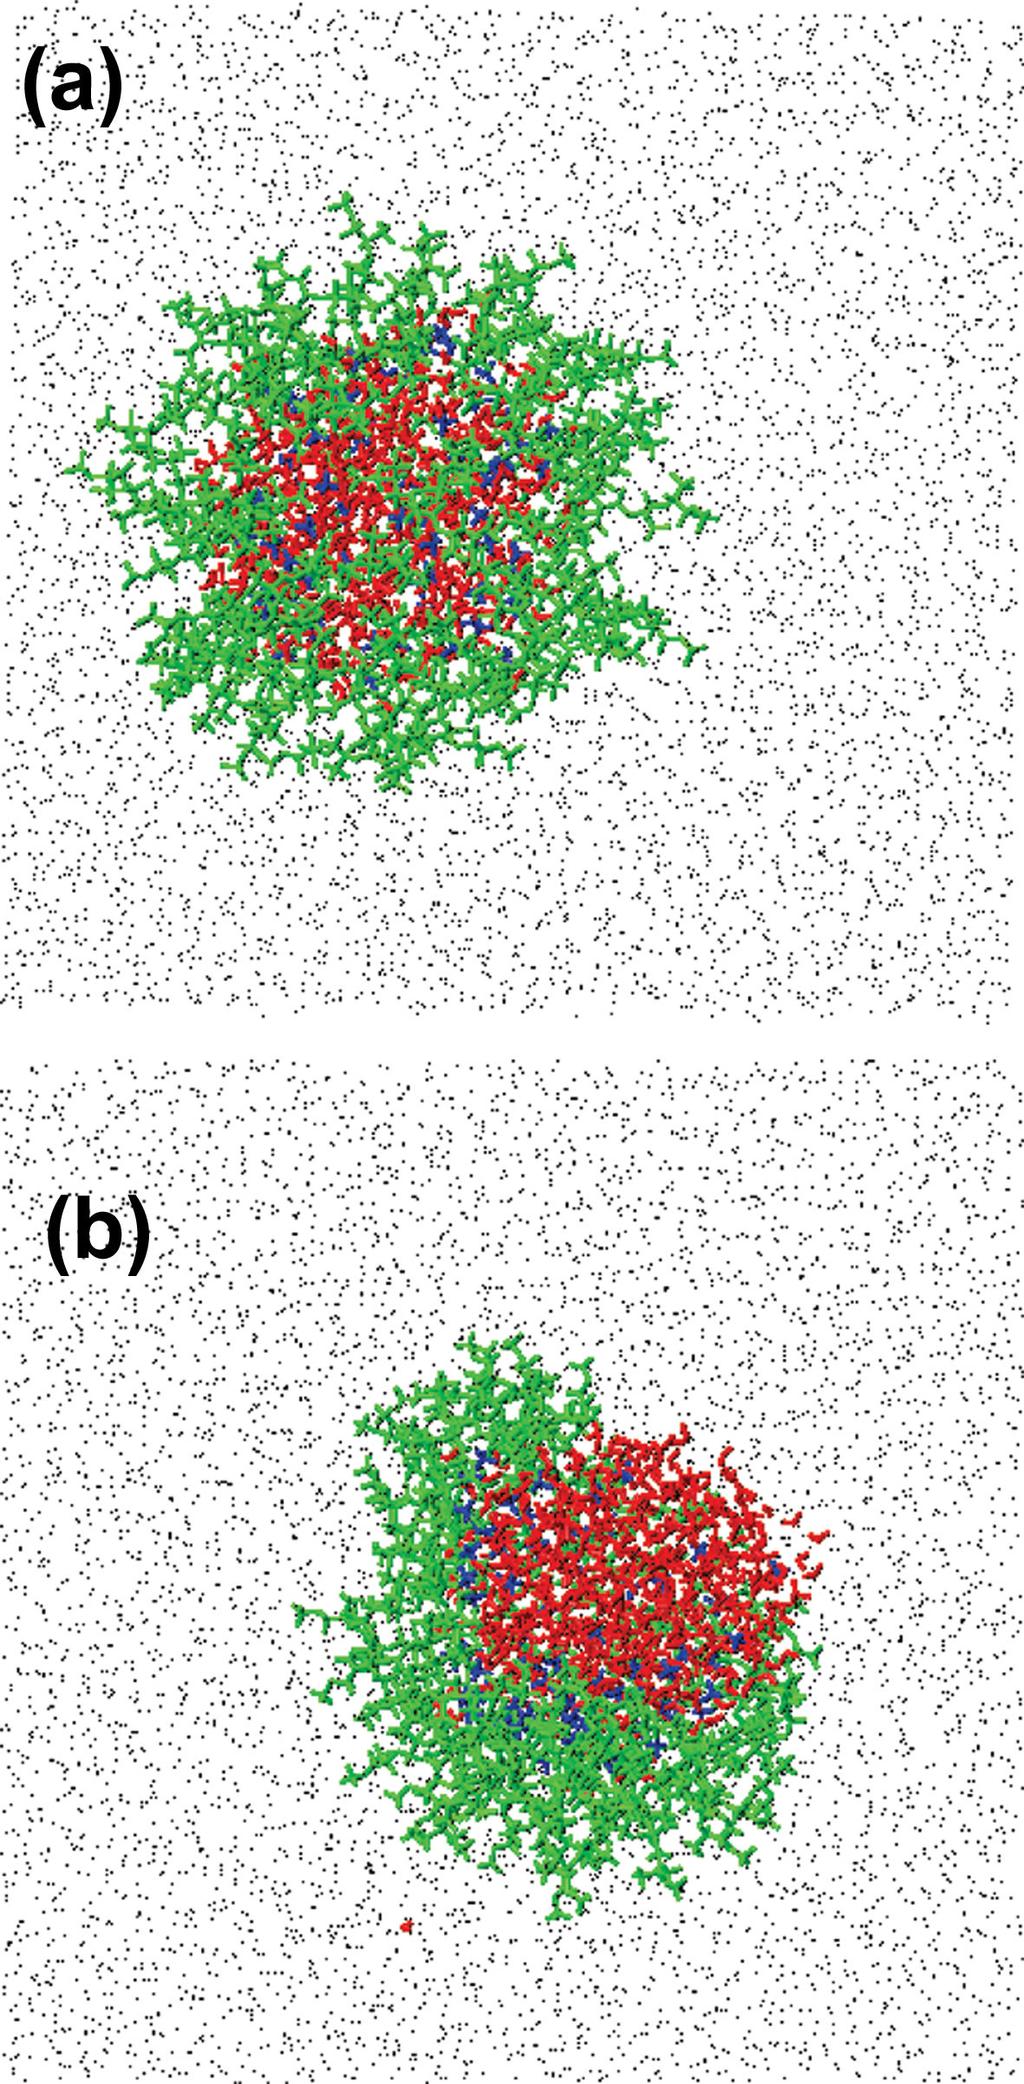 Figure 2.6: Structures of (a) PFPE and (b) PE aggregates from self-assembly.